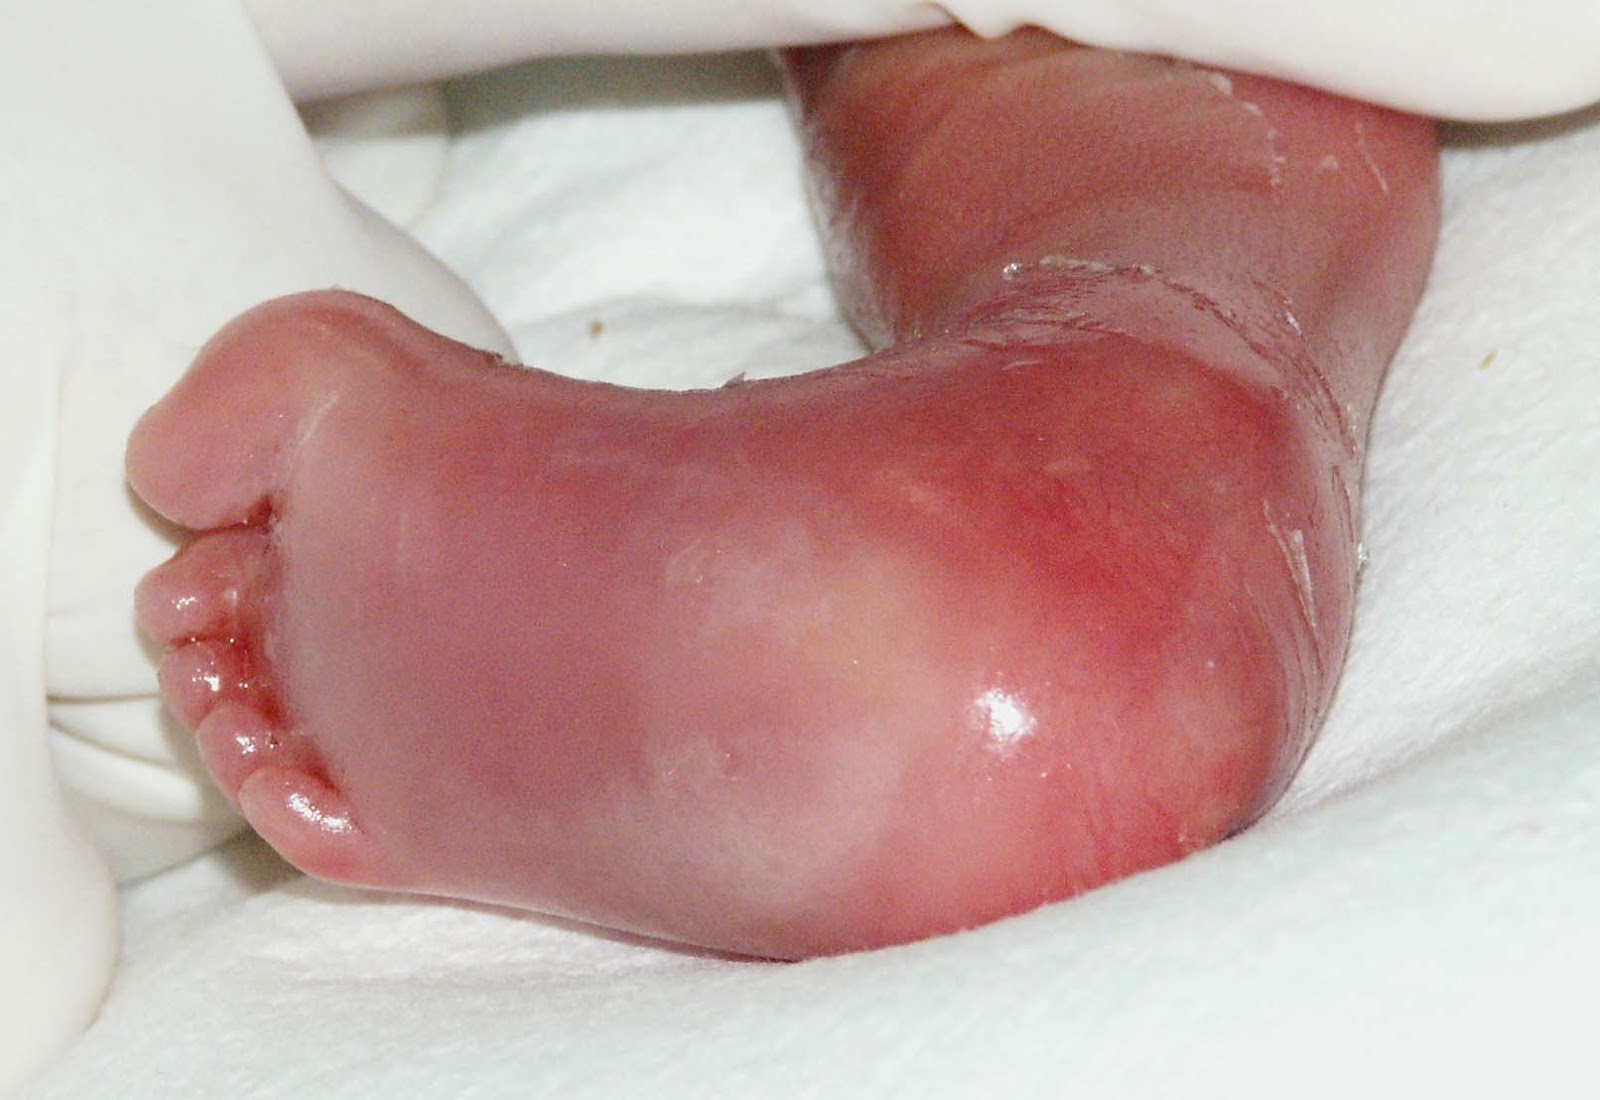 Rare Genetic Disorder: Harlequin Ichthyosis - What is it?